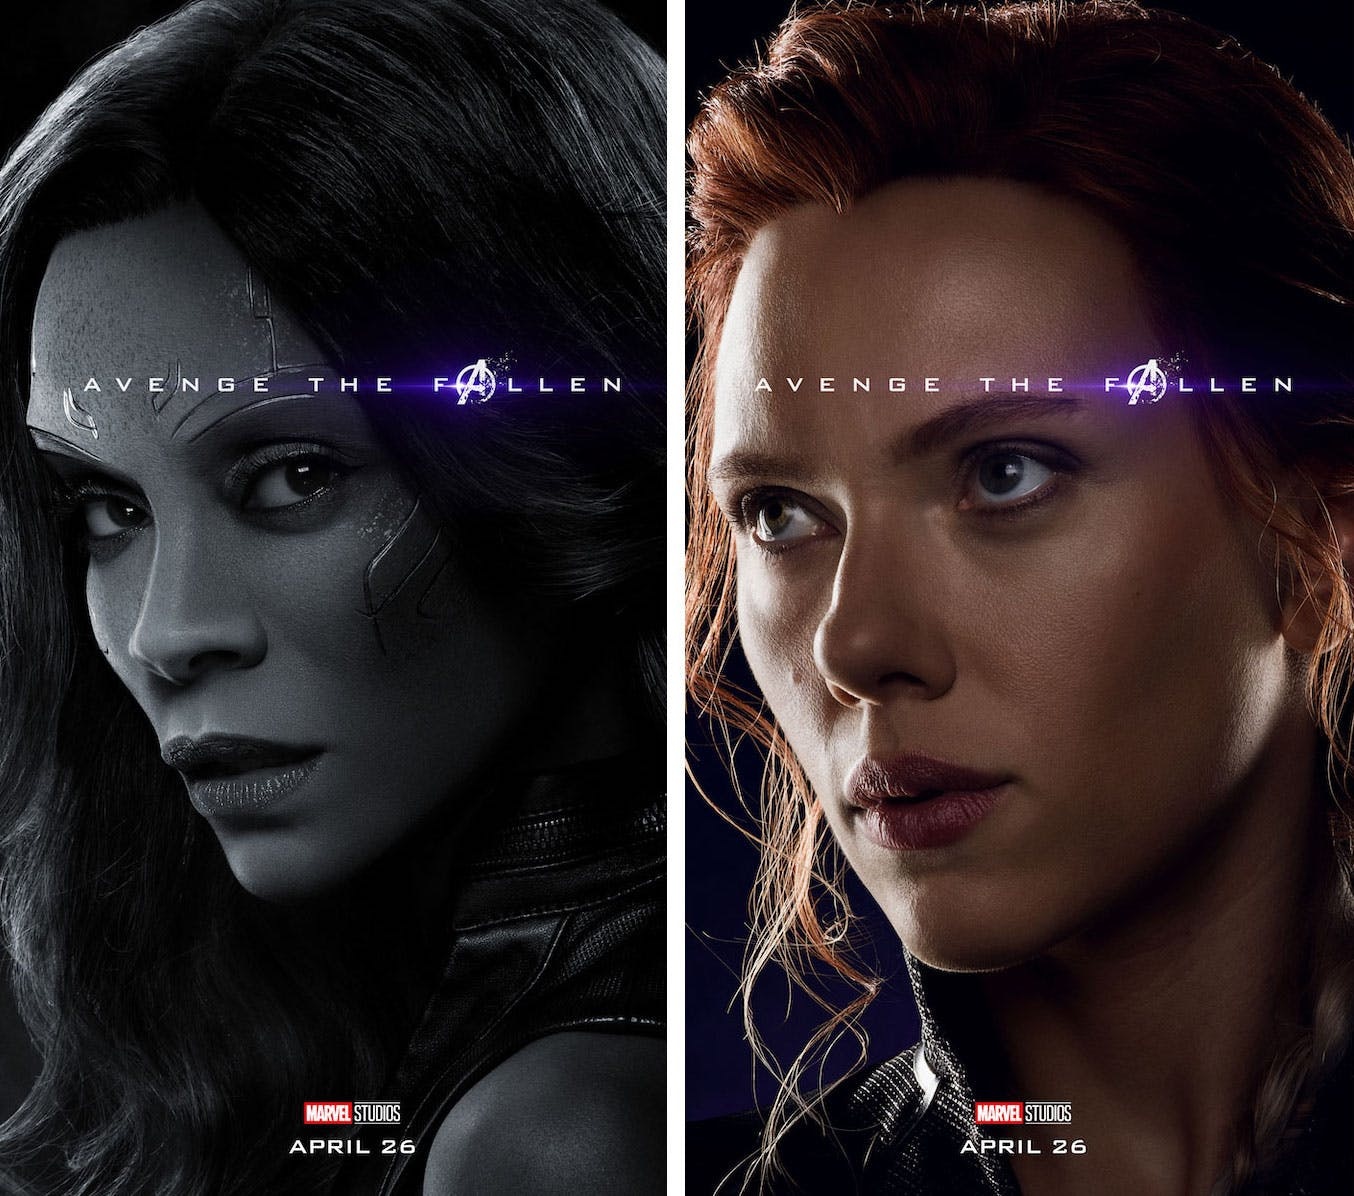 Avenge the Fallen with Avengers: Endgame character posters